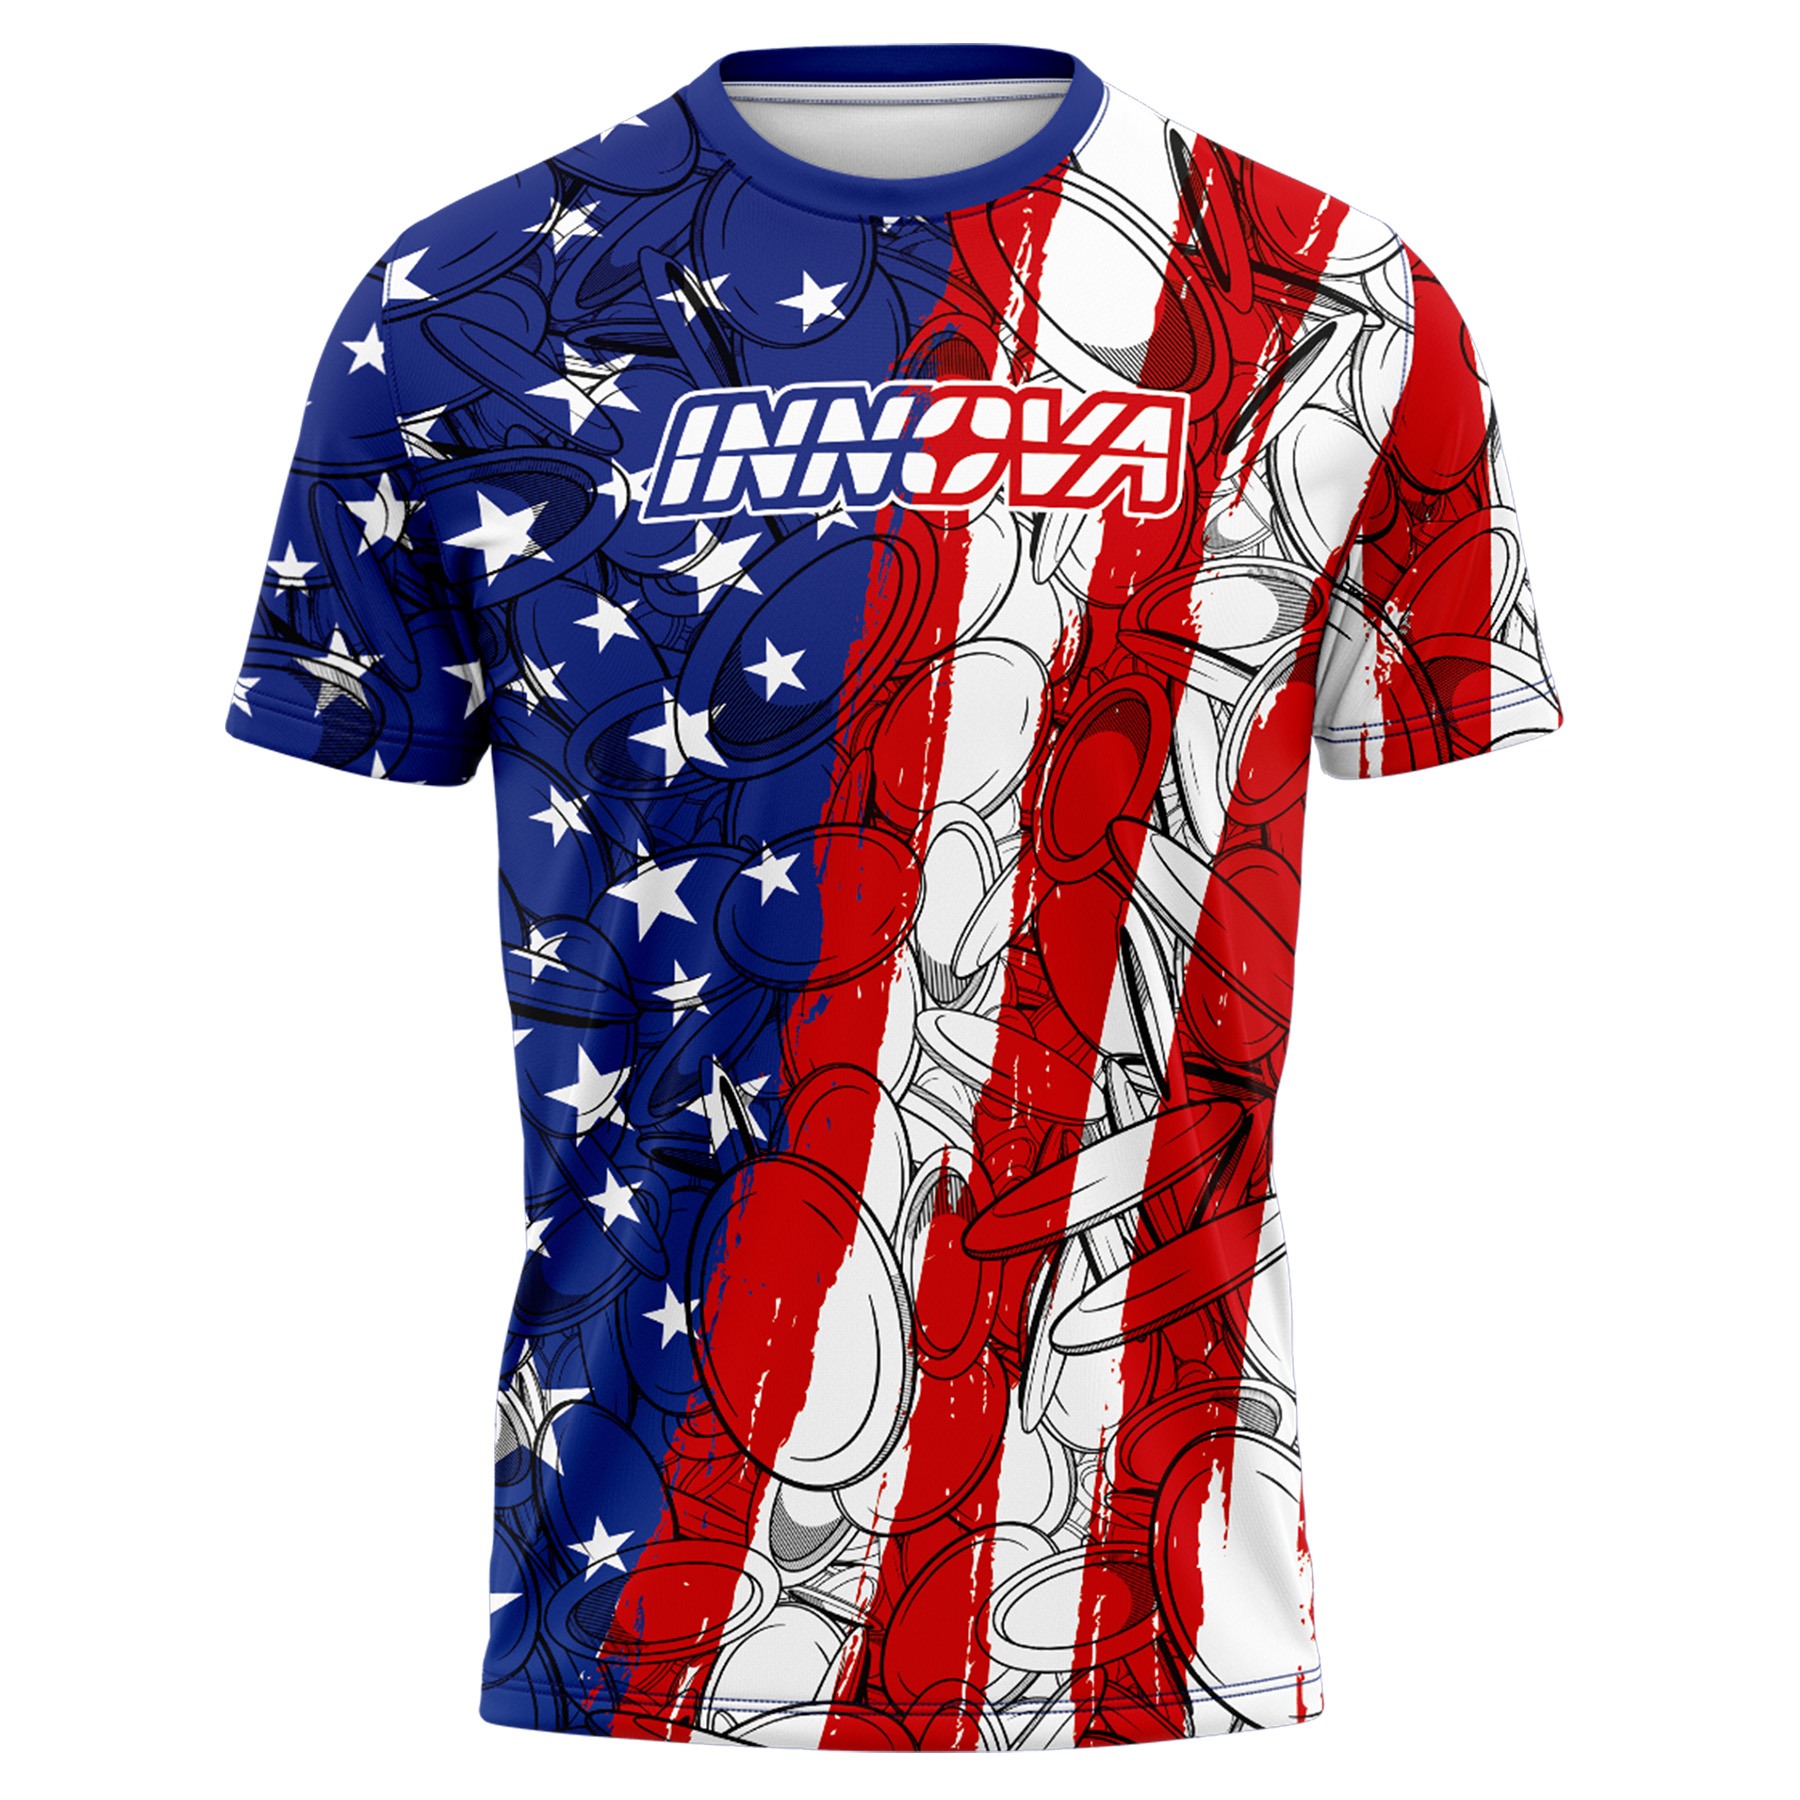 Innova Freedom Jersey. Red, white, and blue pattern. front.